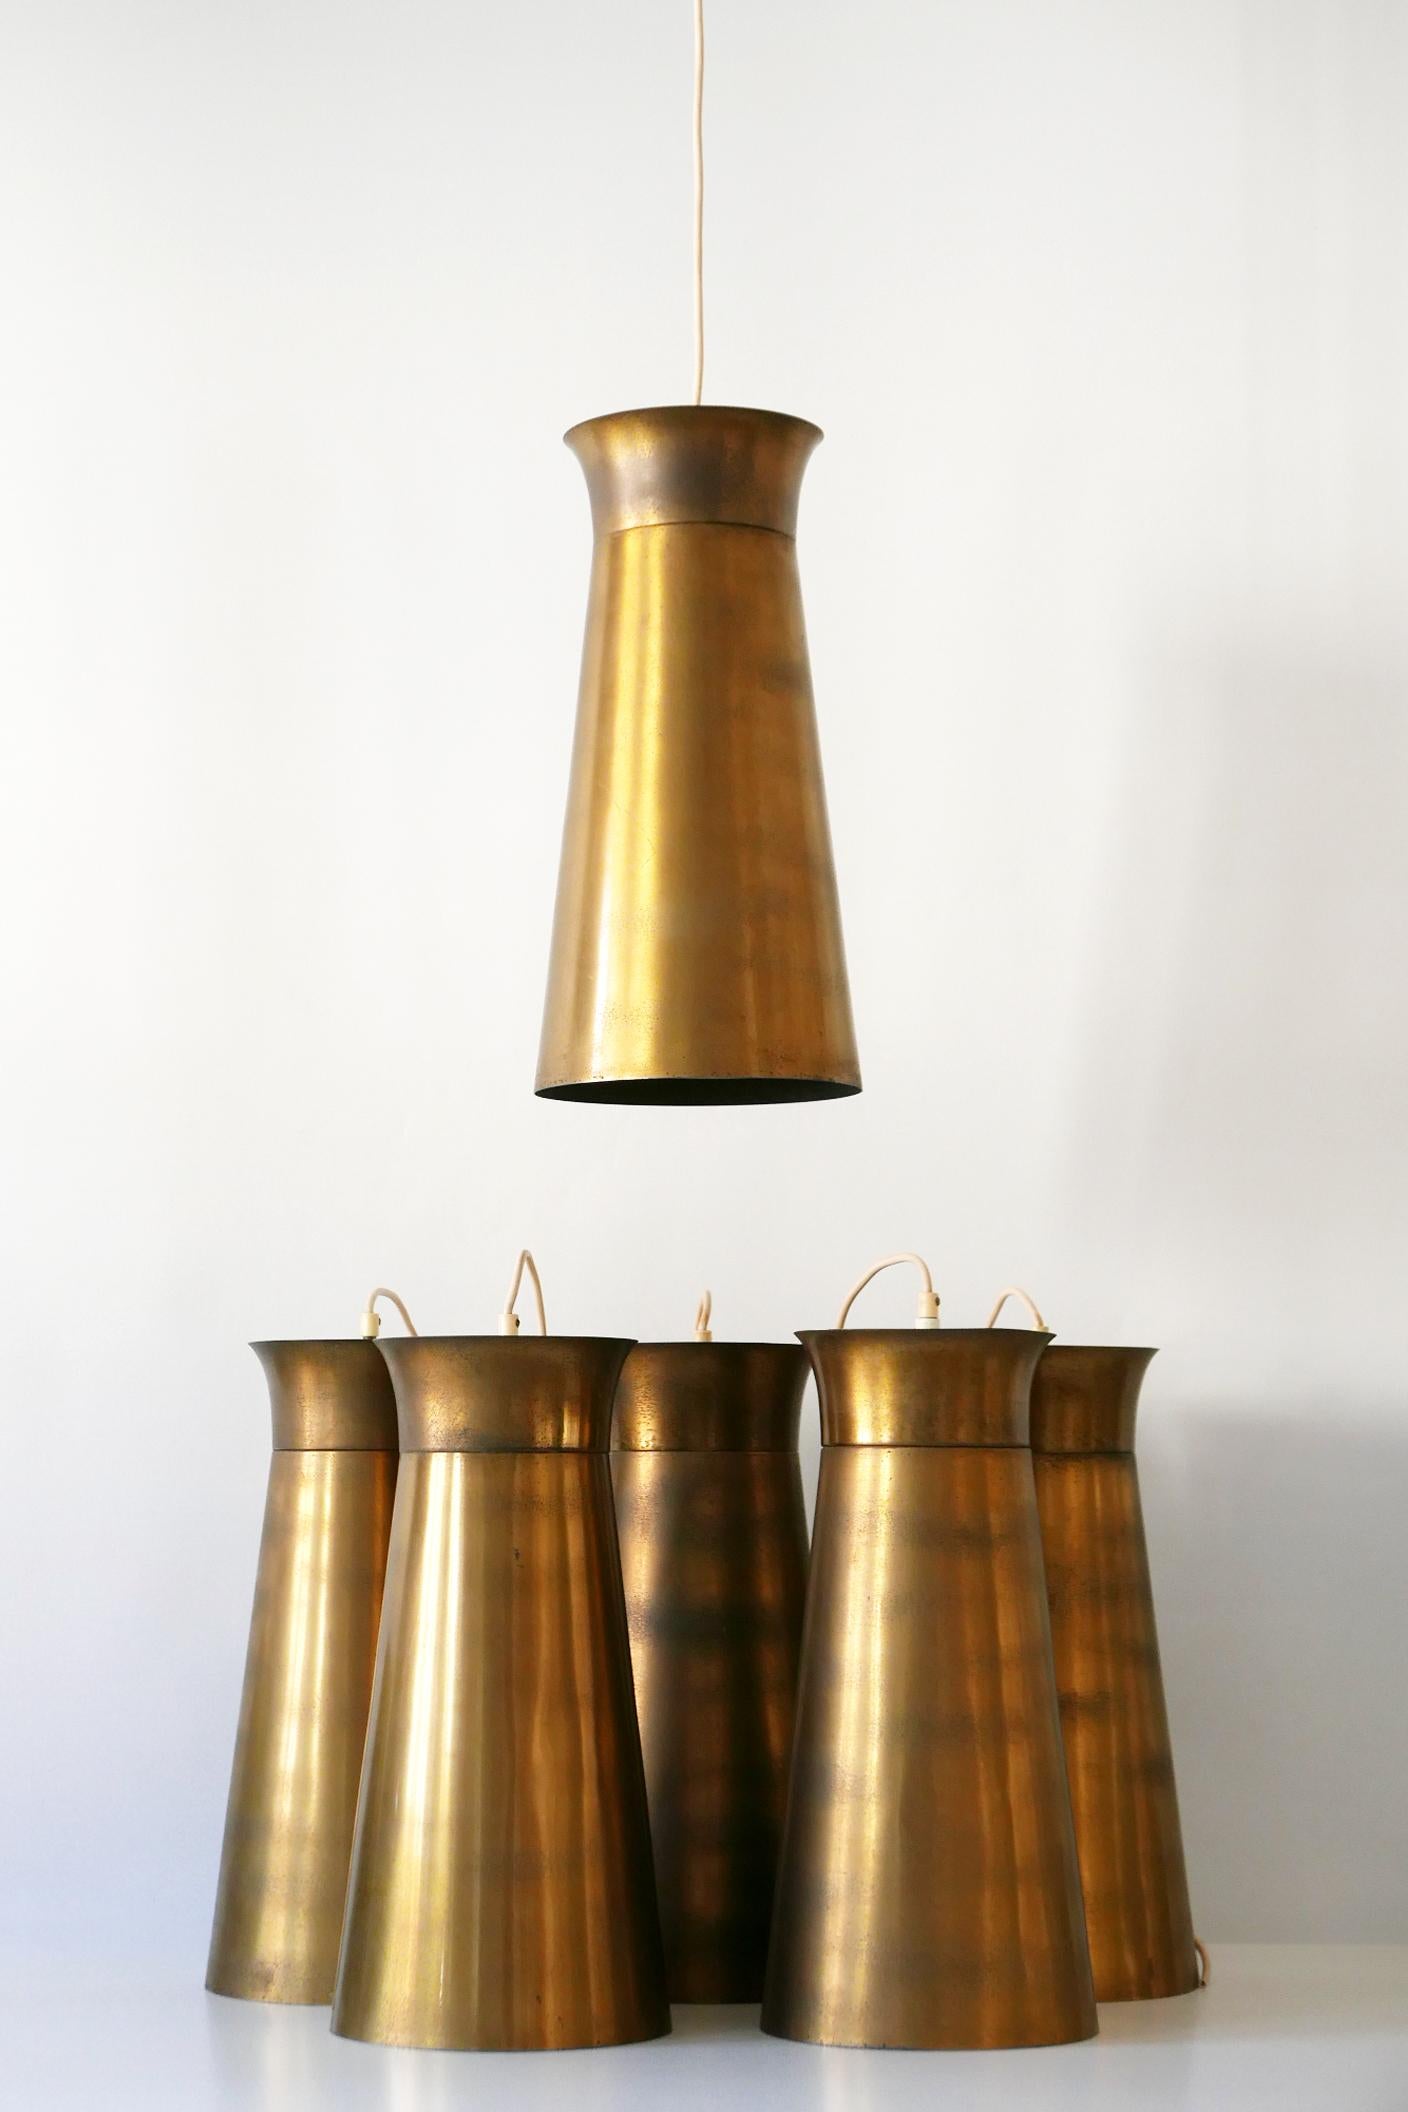 Elegant Mid-Century Modern Brass Pendant Lamps or Hanging Lights, 1950s, Germany For Sale 14